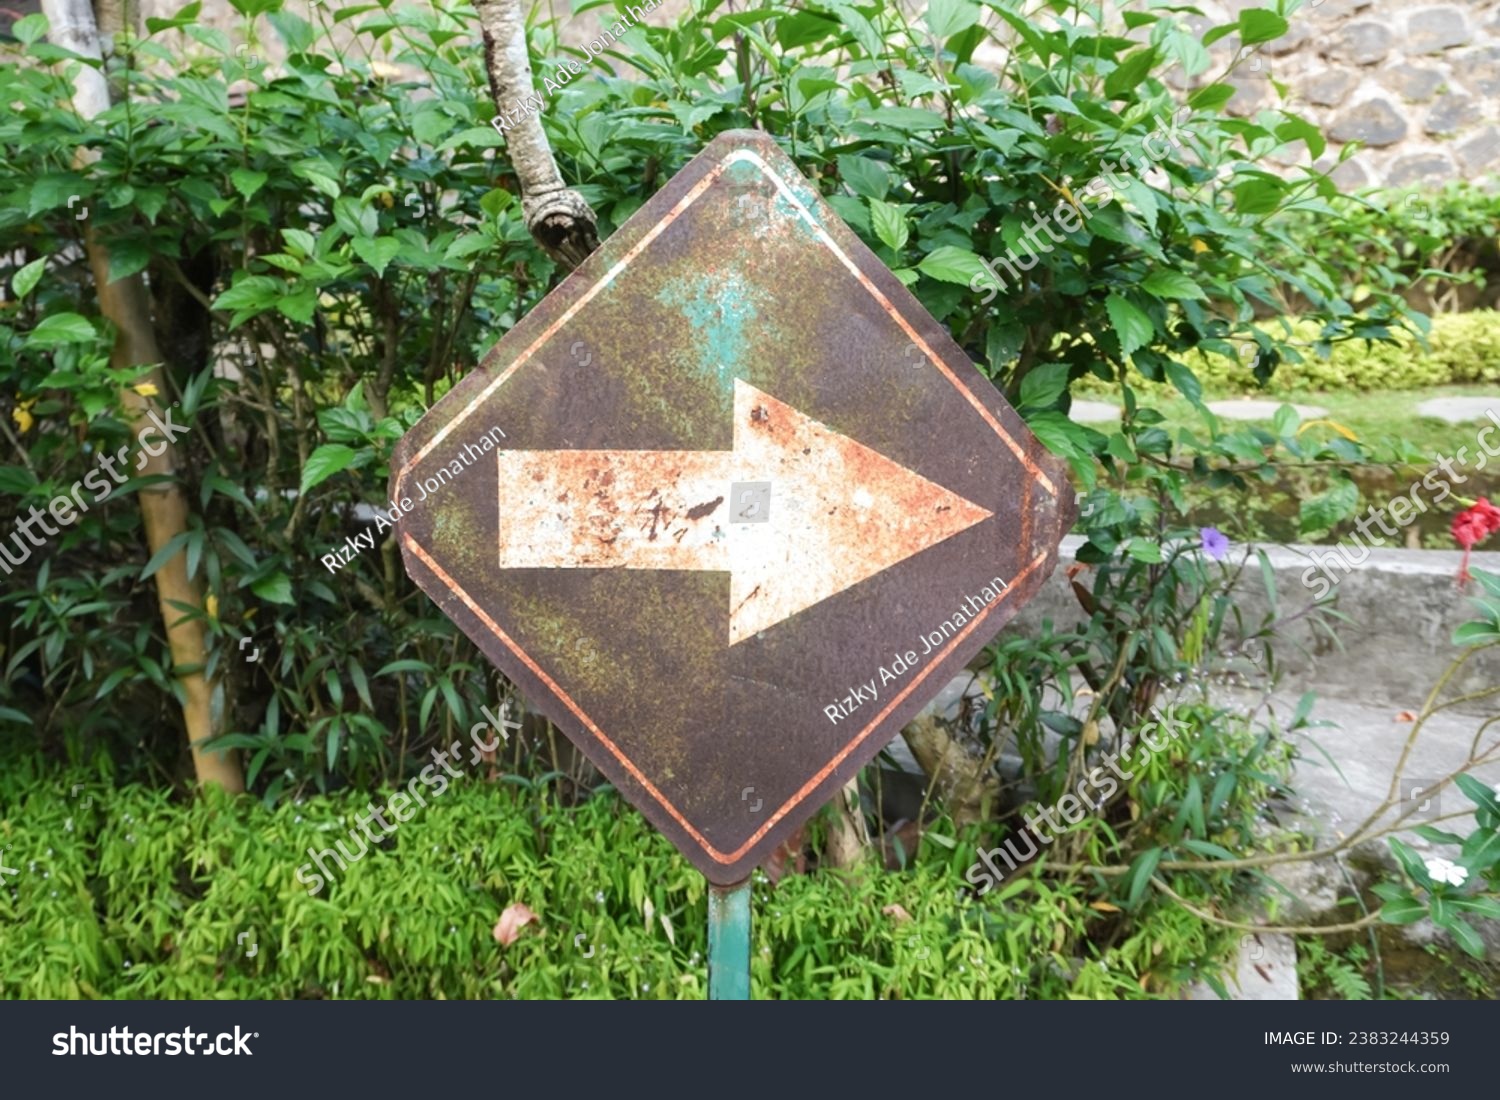 Weathered Turn Right sign on rusty colored board with garden backgrounds. White arrow turn right allowed sign. #2383244359